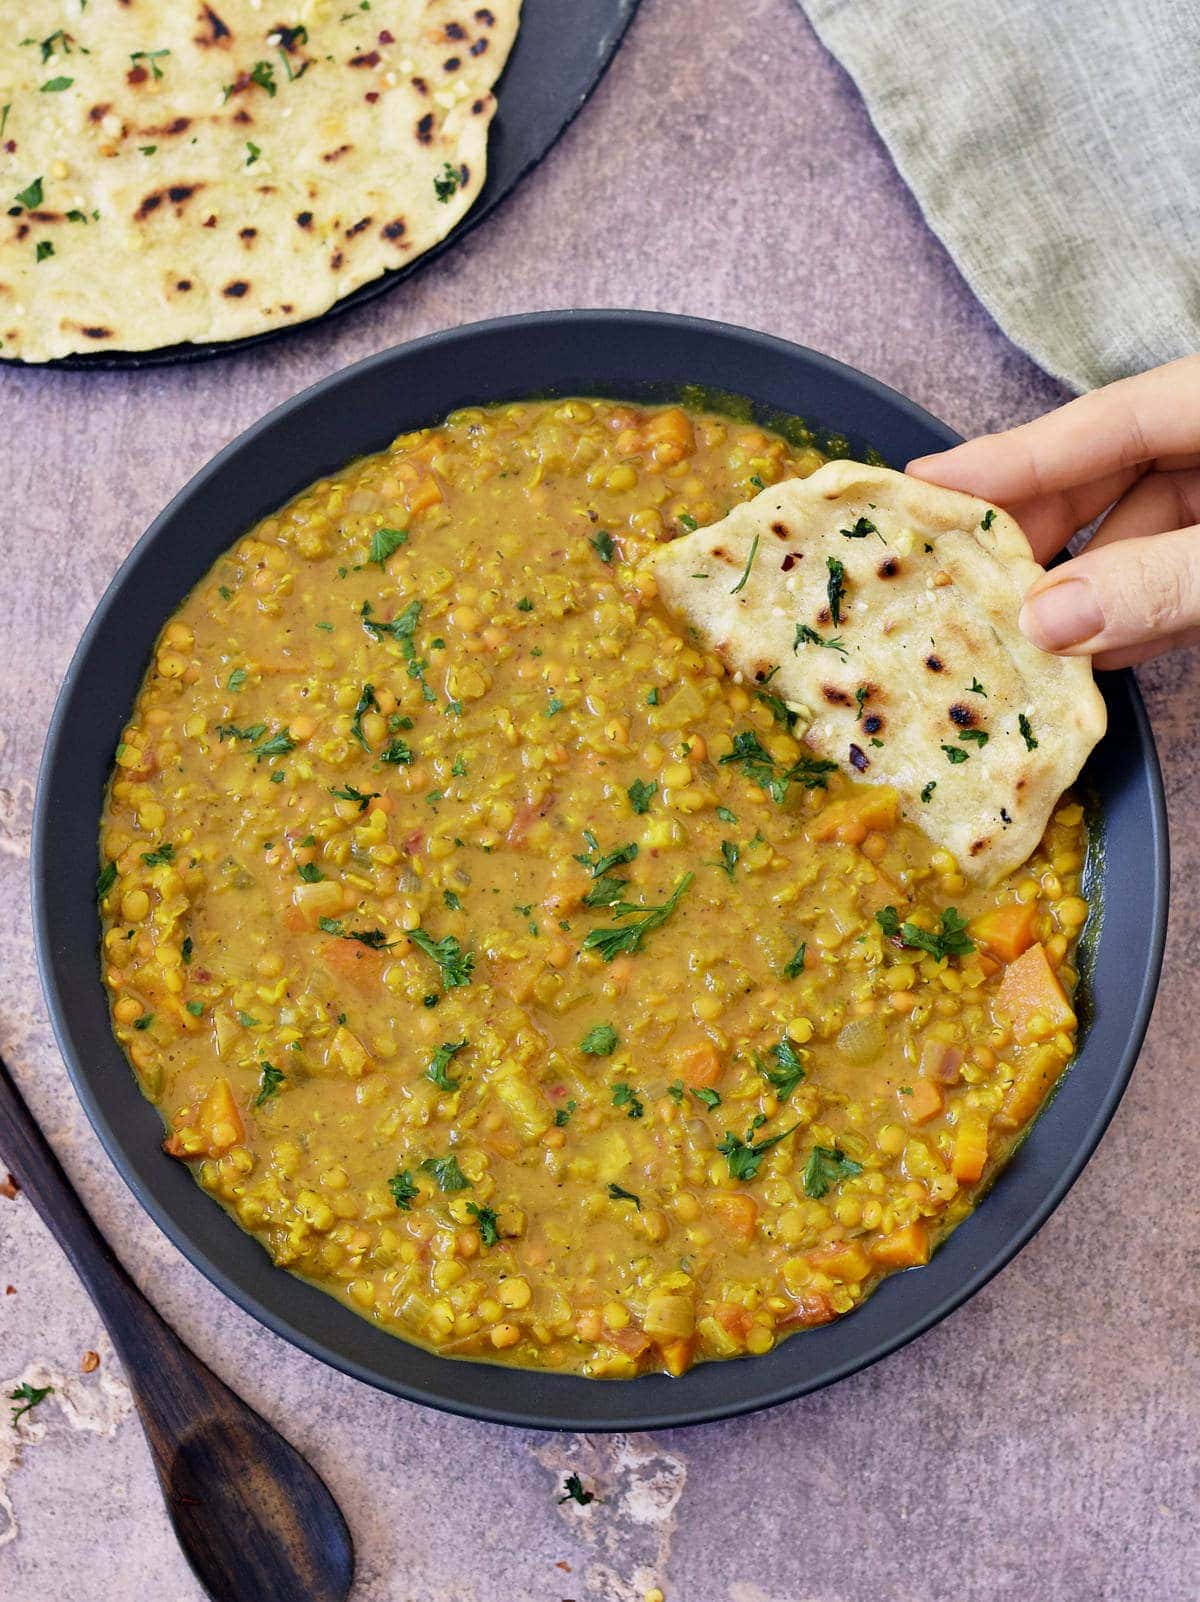 Hand dipping a piece of naan bread into dal in black bowl